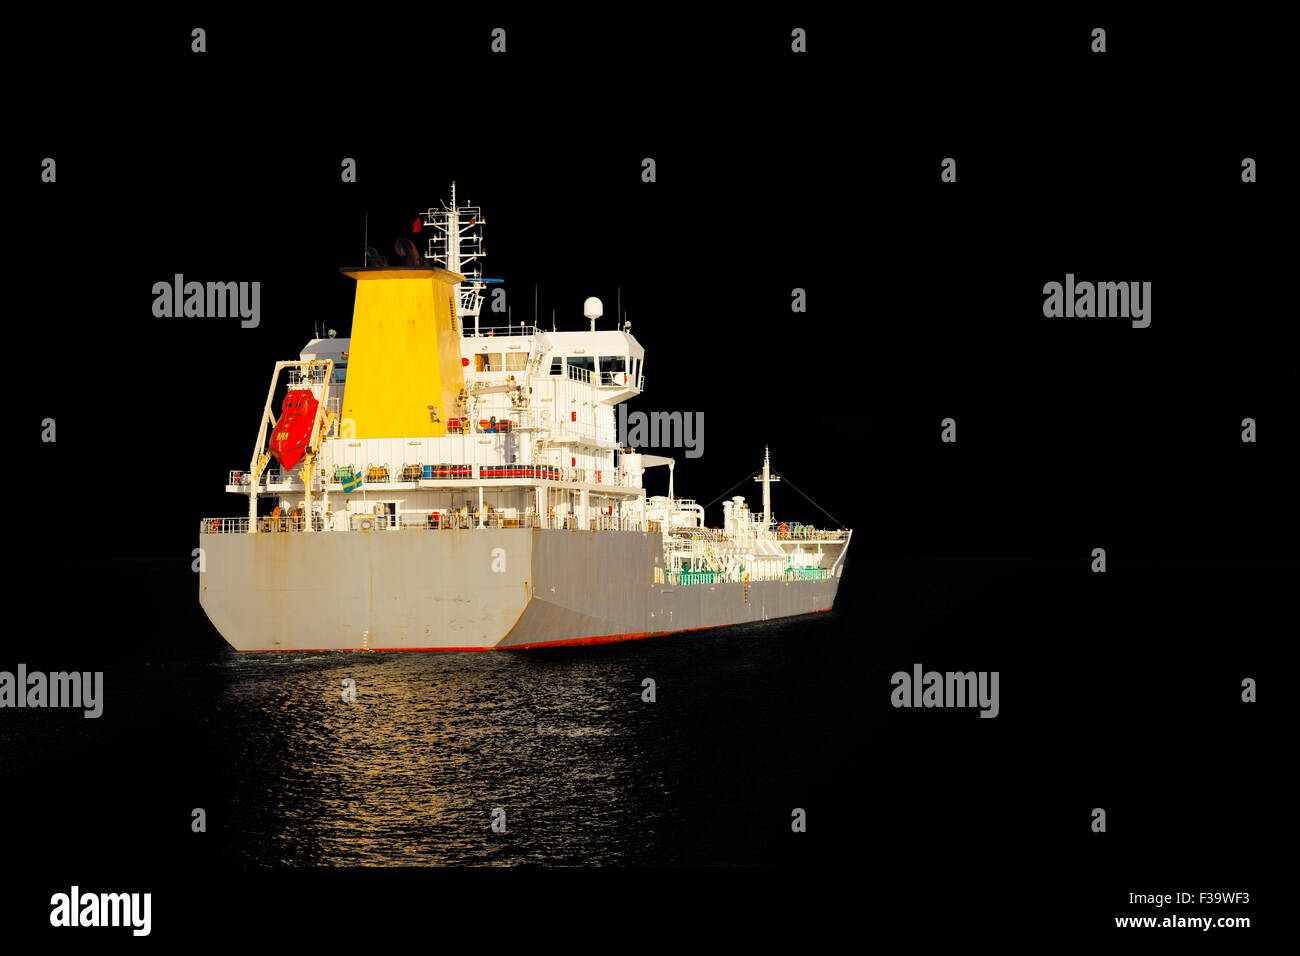 Photo of a tanker ship isolated on black background. Stock Photo